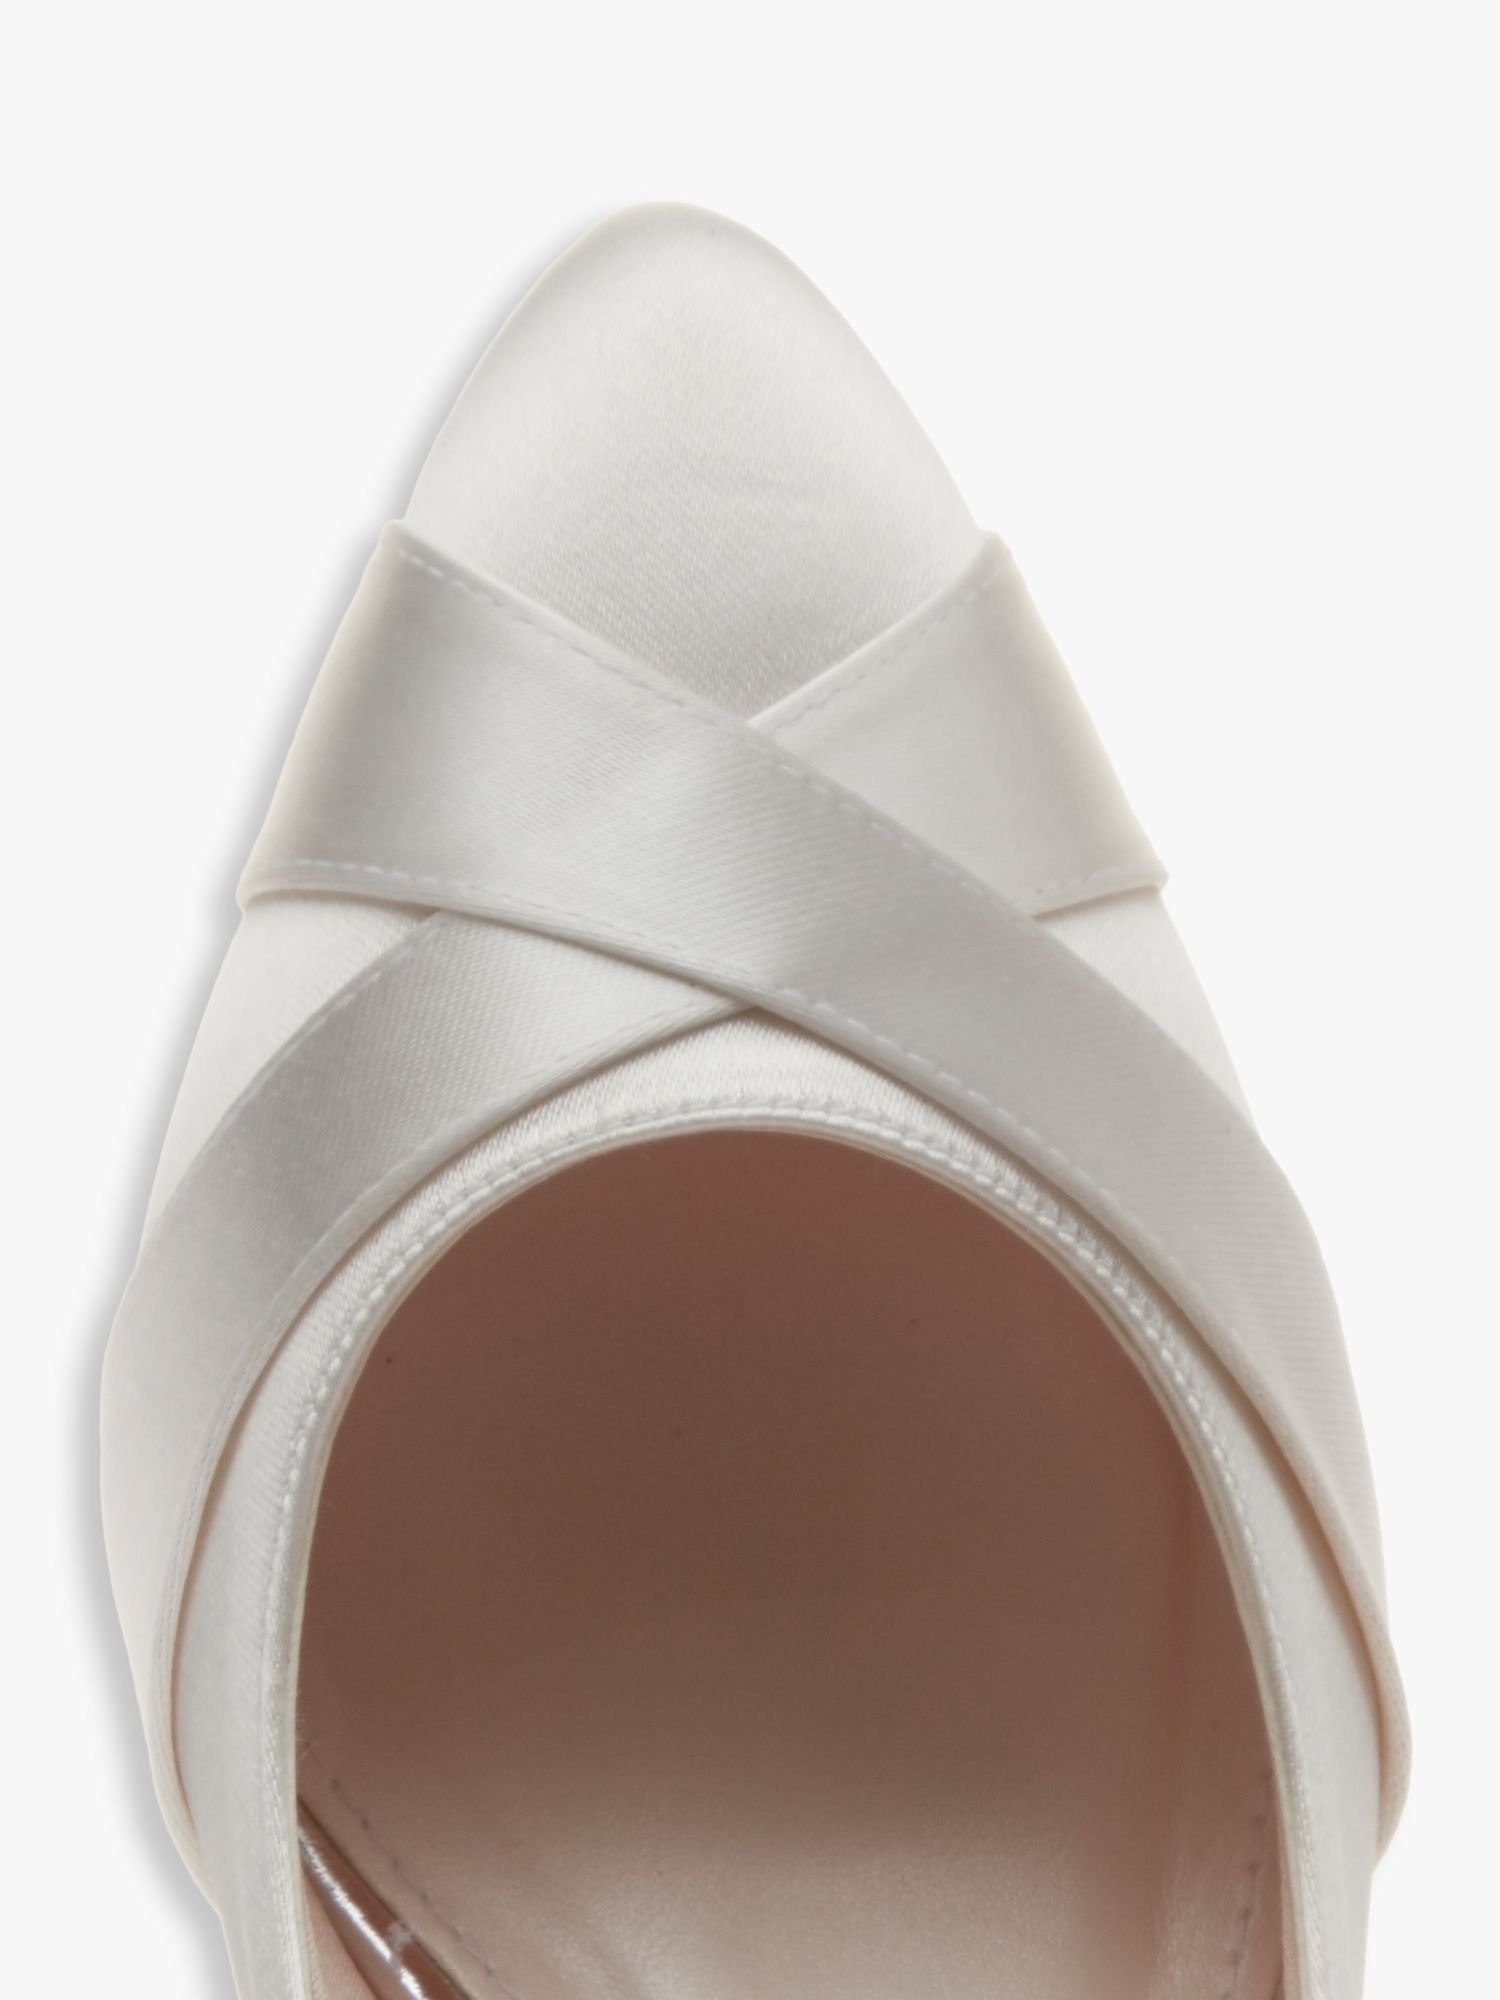 Buy Rainbow Club Wide Fit Lexi Satin Toe Point Court Shoes, Ivory Online at johnlewis.com